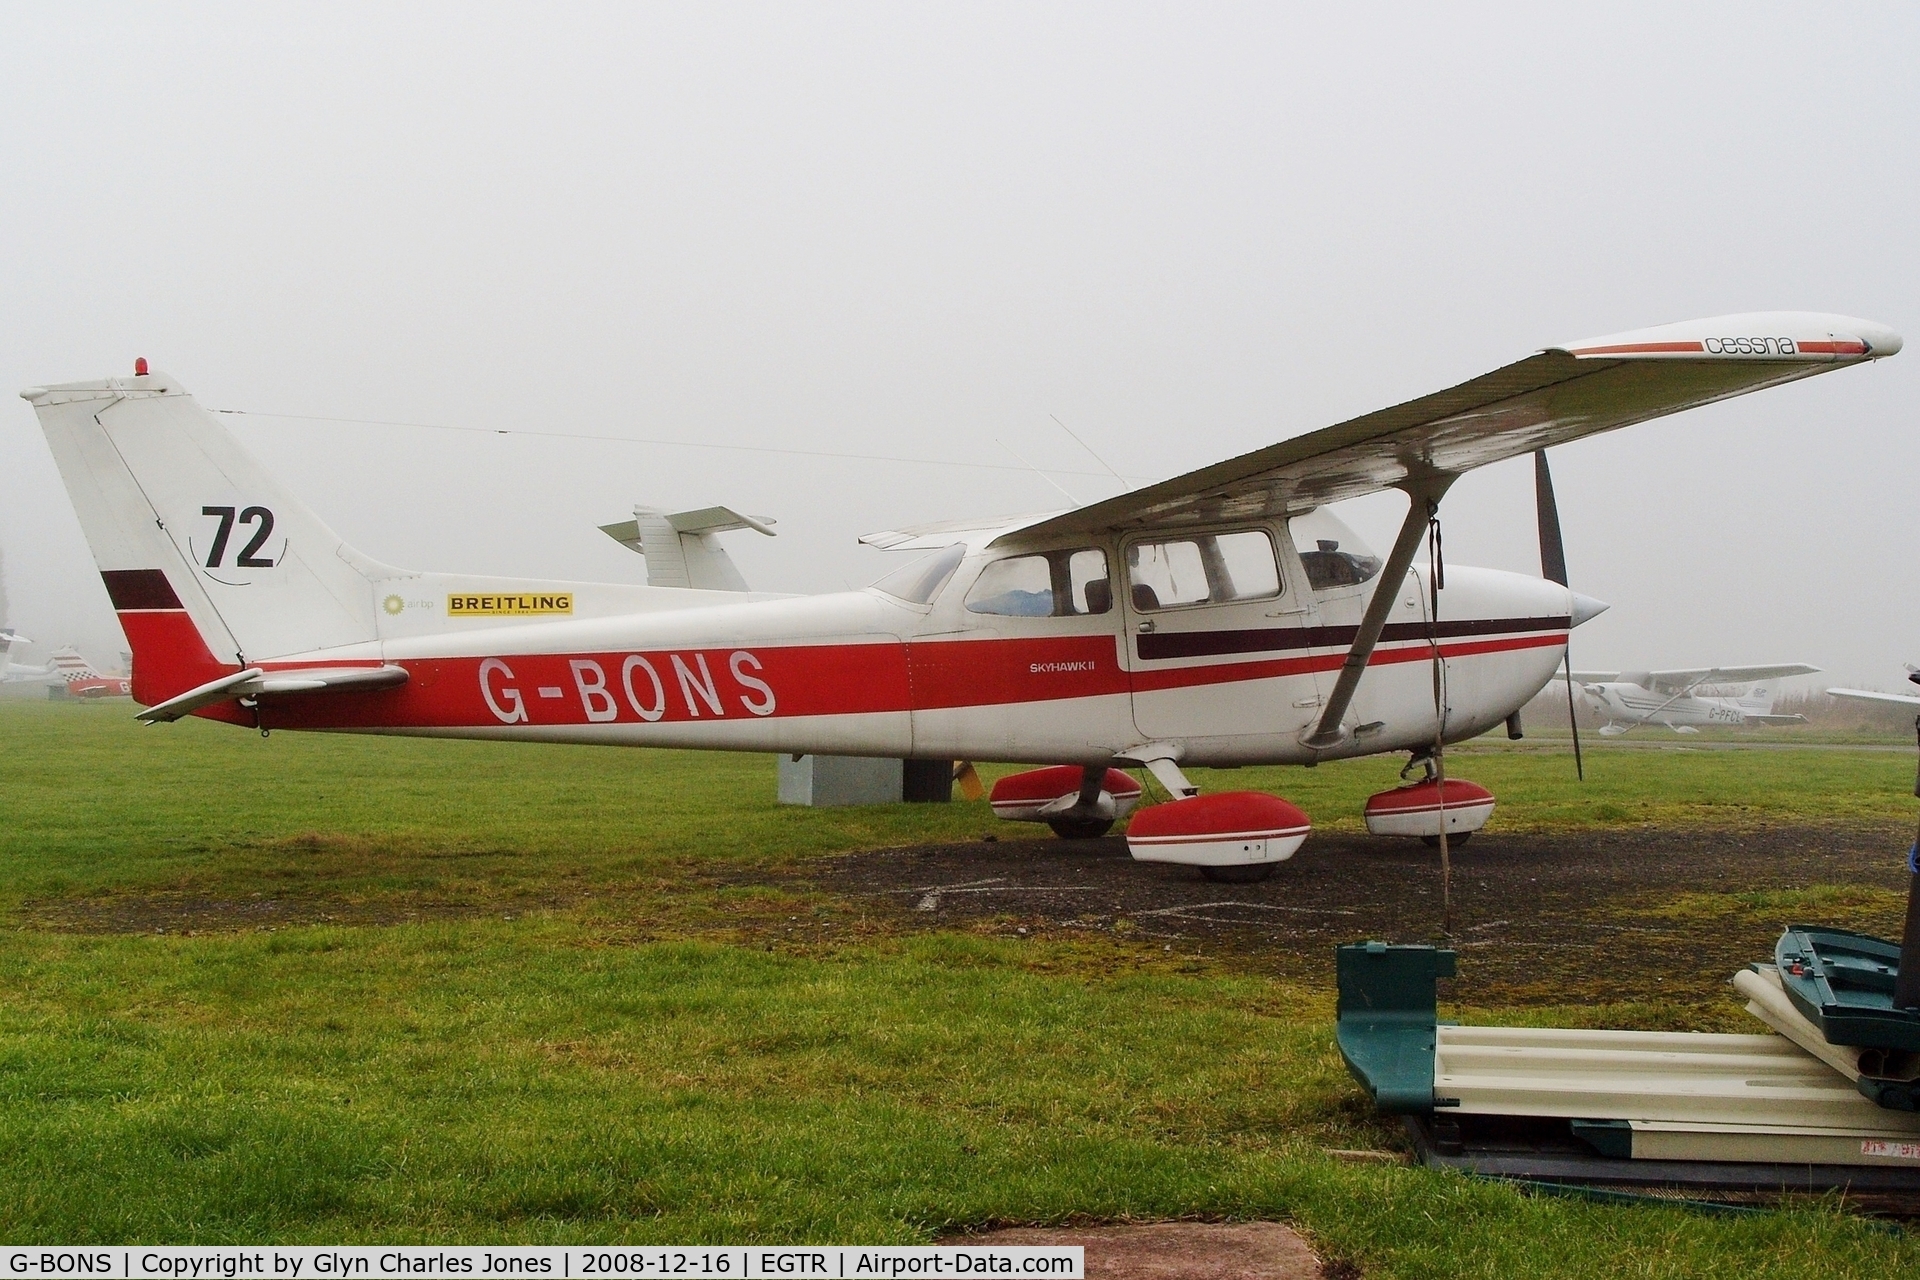 G-BONS, 1976 Cessna 172N C/N 172-68345, Taken on a quiet cold and foggy day. With thanks to Elstree control tower who granted me authority to take photographs on the aerodrome. Previously C-GIUF. Owned by G-BONS Group. Sporting '72'.